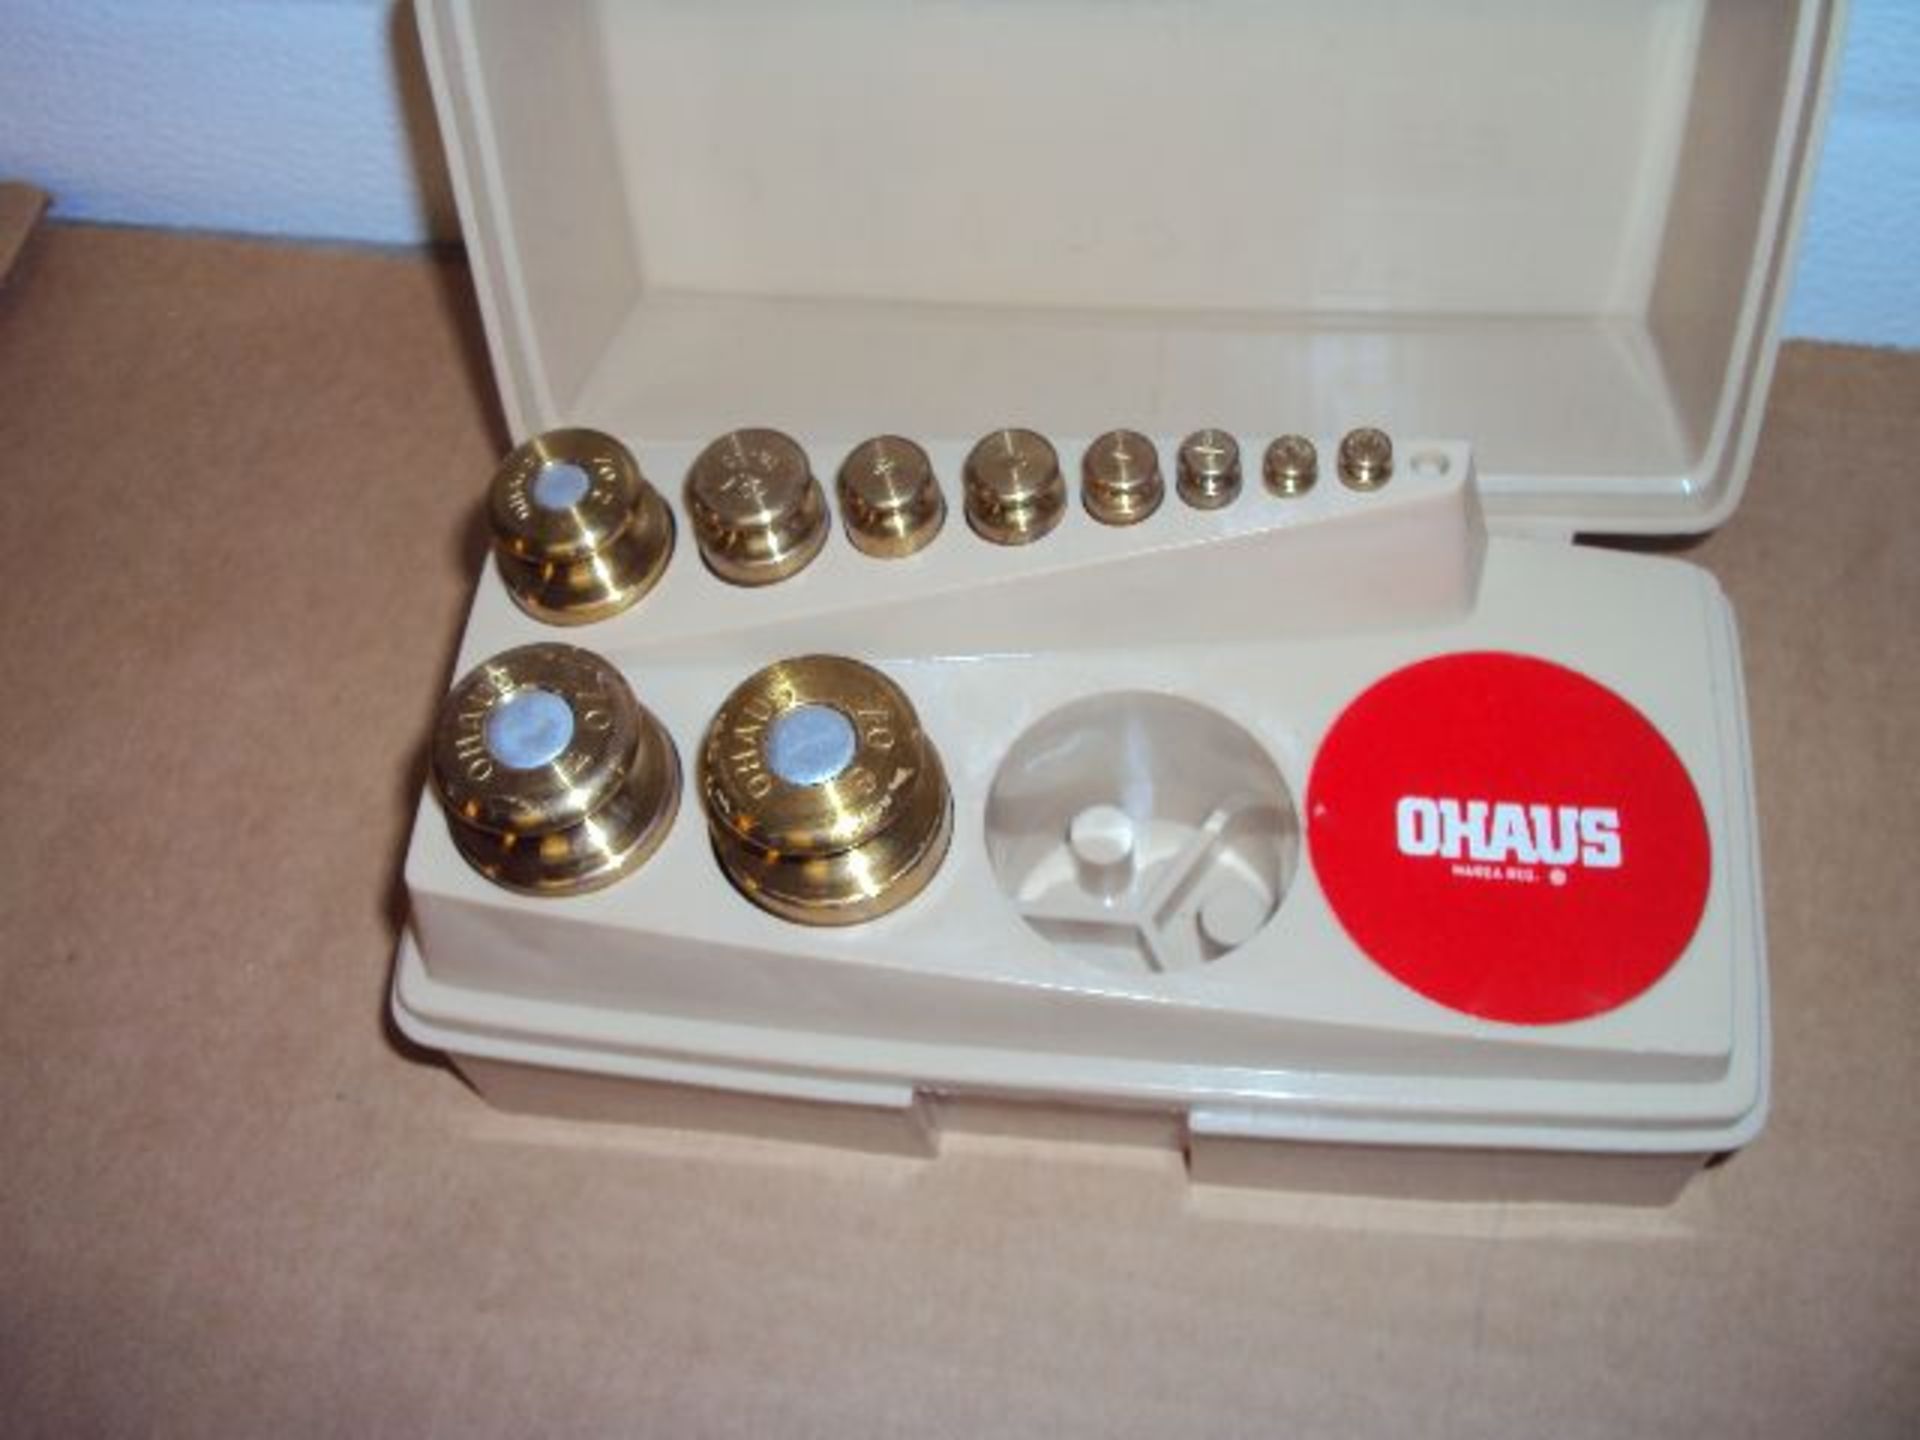 Assorted Ohaus and Ainsworth Metric and English Scale Test Calibration Weights - Image 3 of 8